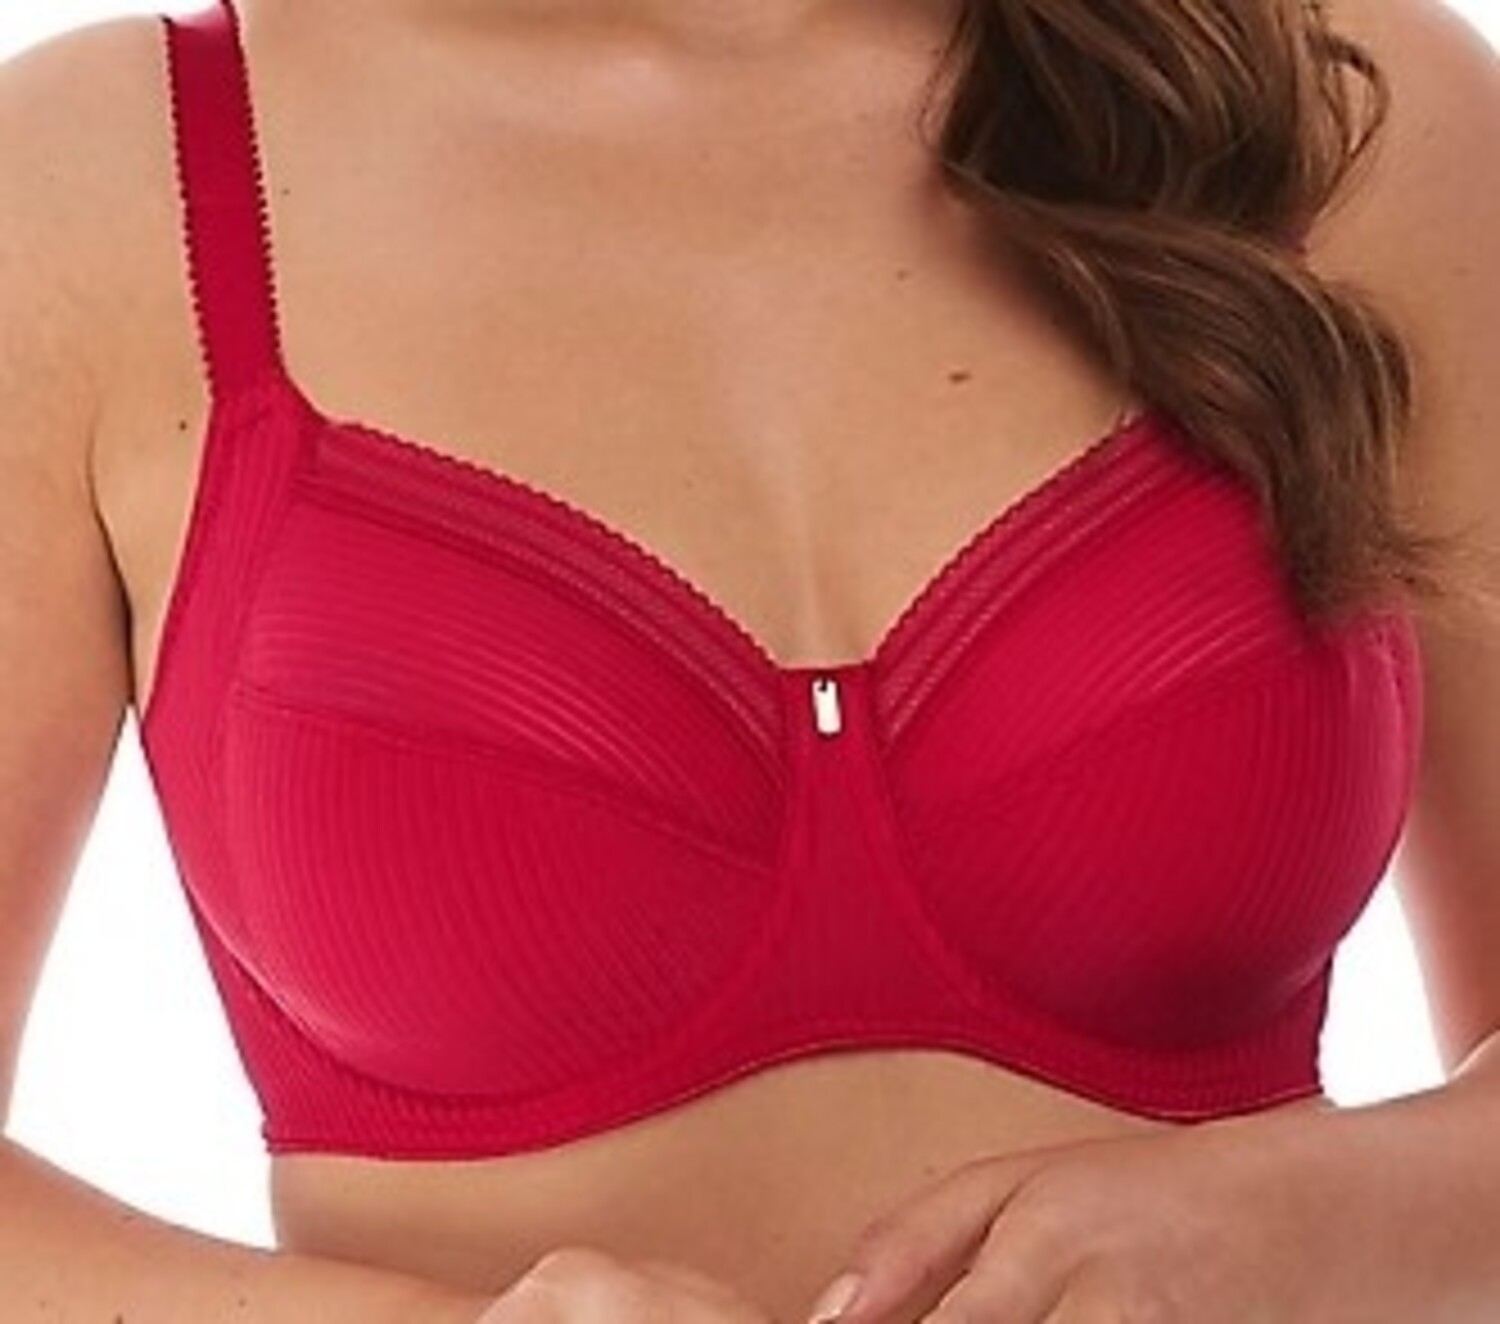 FANTASIE ILLUSION SIDE SUPPORT FULL CUP BRA – Tops & Bottoms